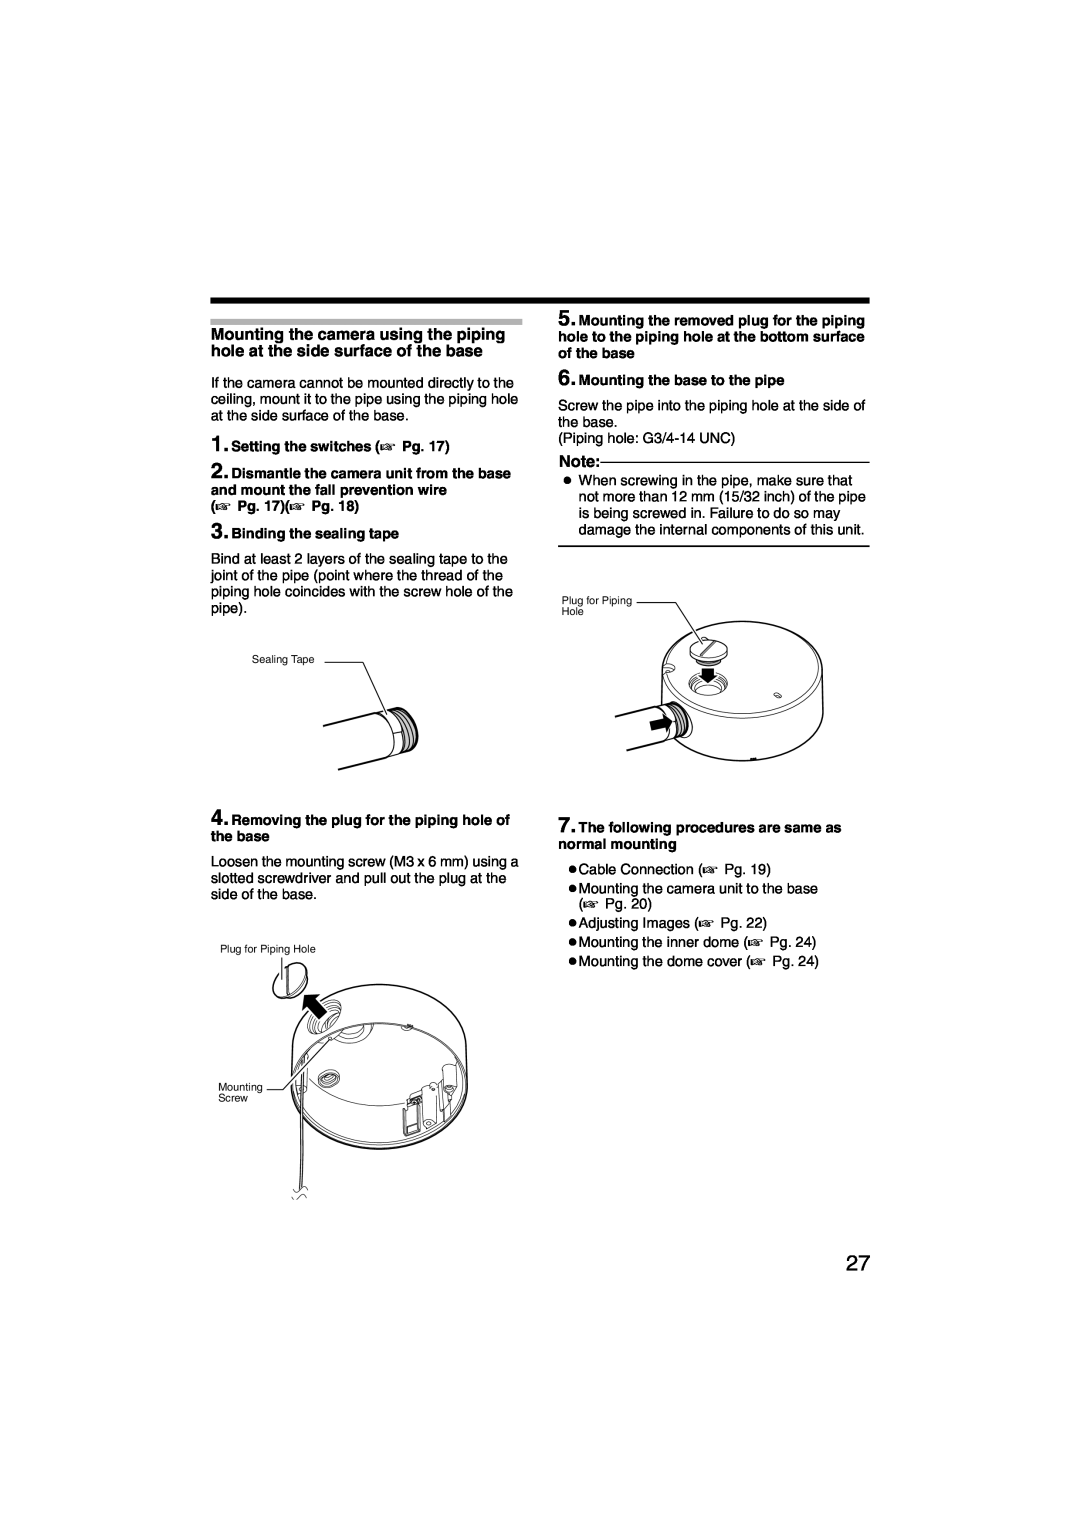 JVC TK-C215VP4, TK-C215VP12 A Pg. 17A Pg 3. Binding the sealing tape, Removing the plug for the piping hole of the base 